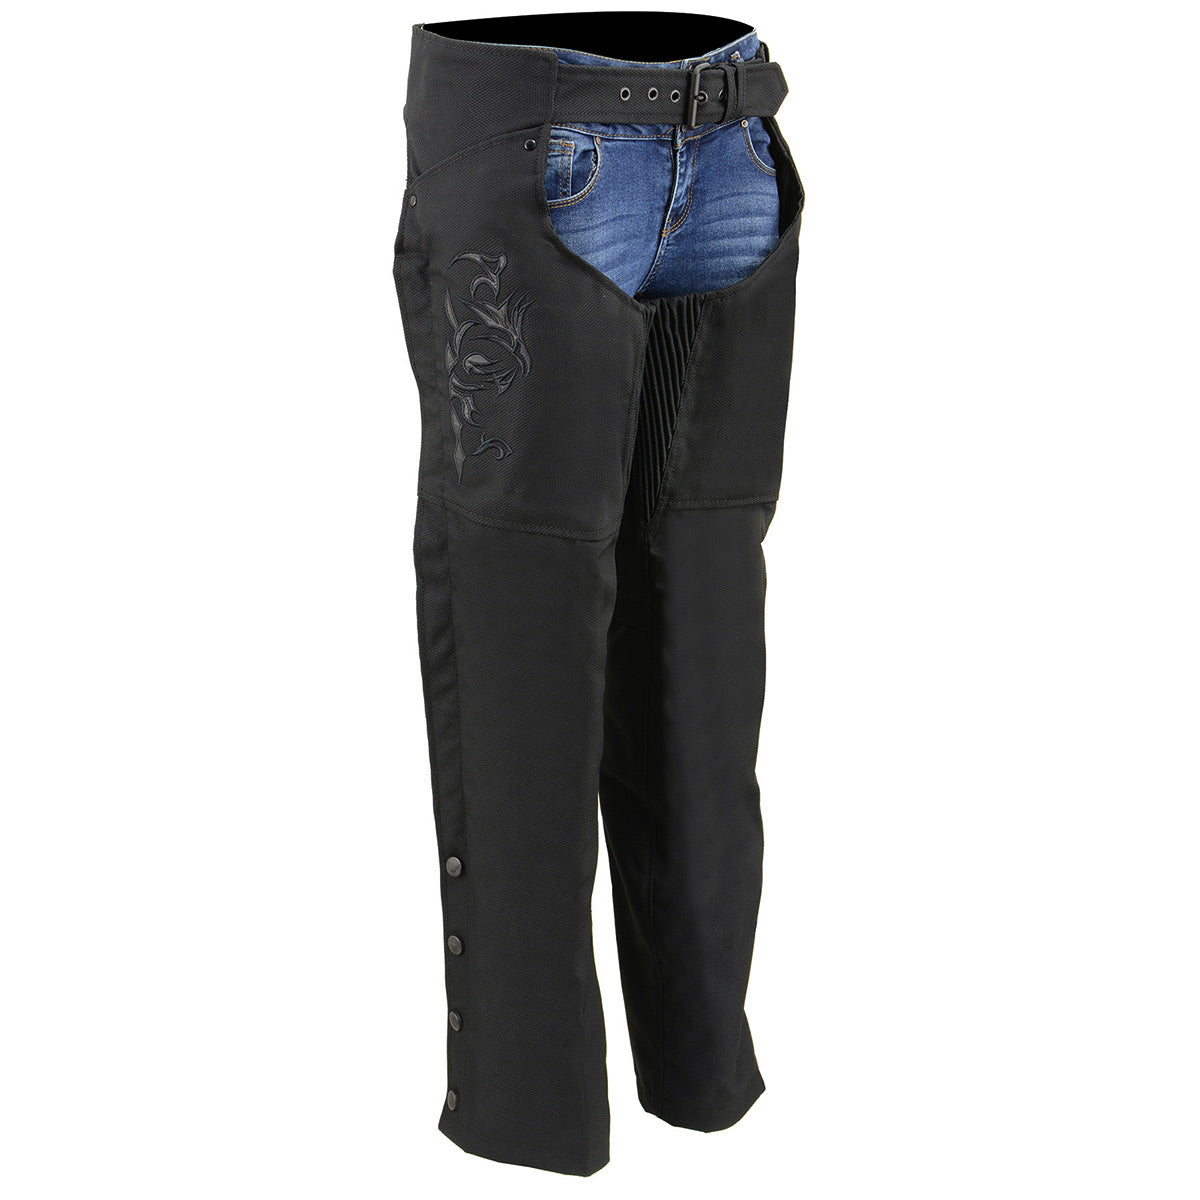 Milwaukee Leather SH1182 Women's Black Textile Motorcycle Riding Chaps with Tribal Embroidery